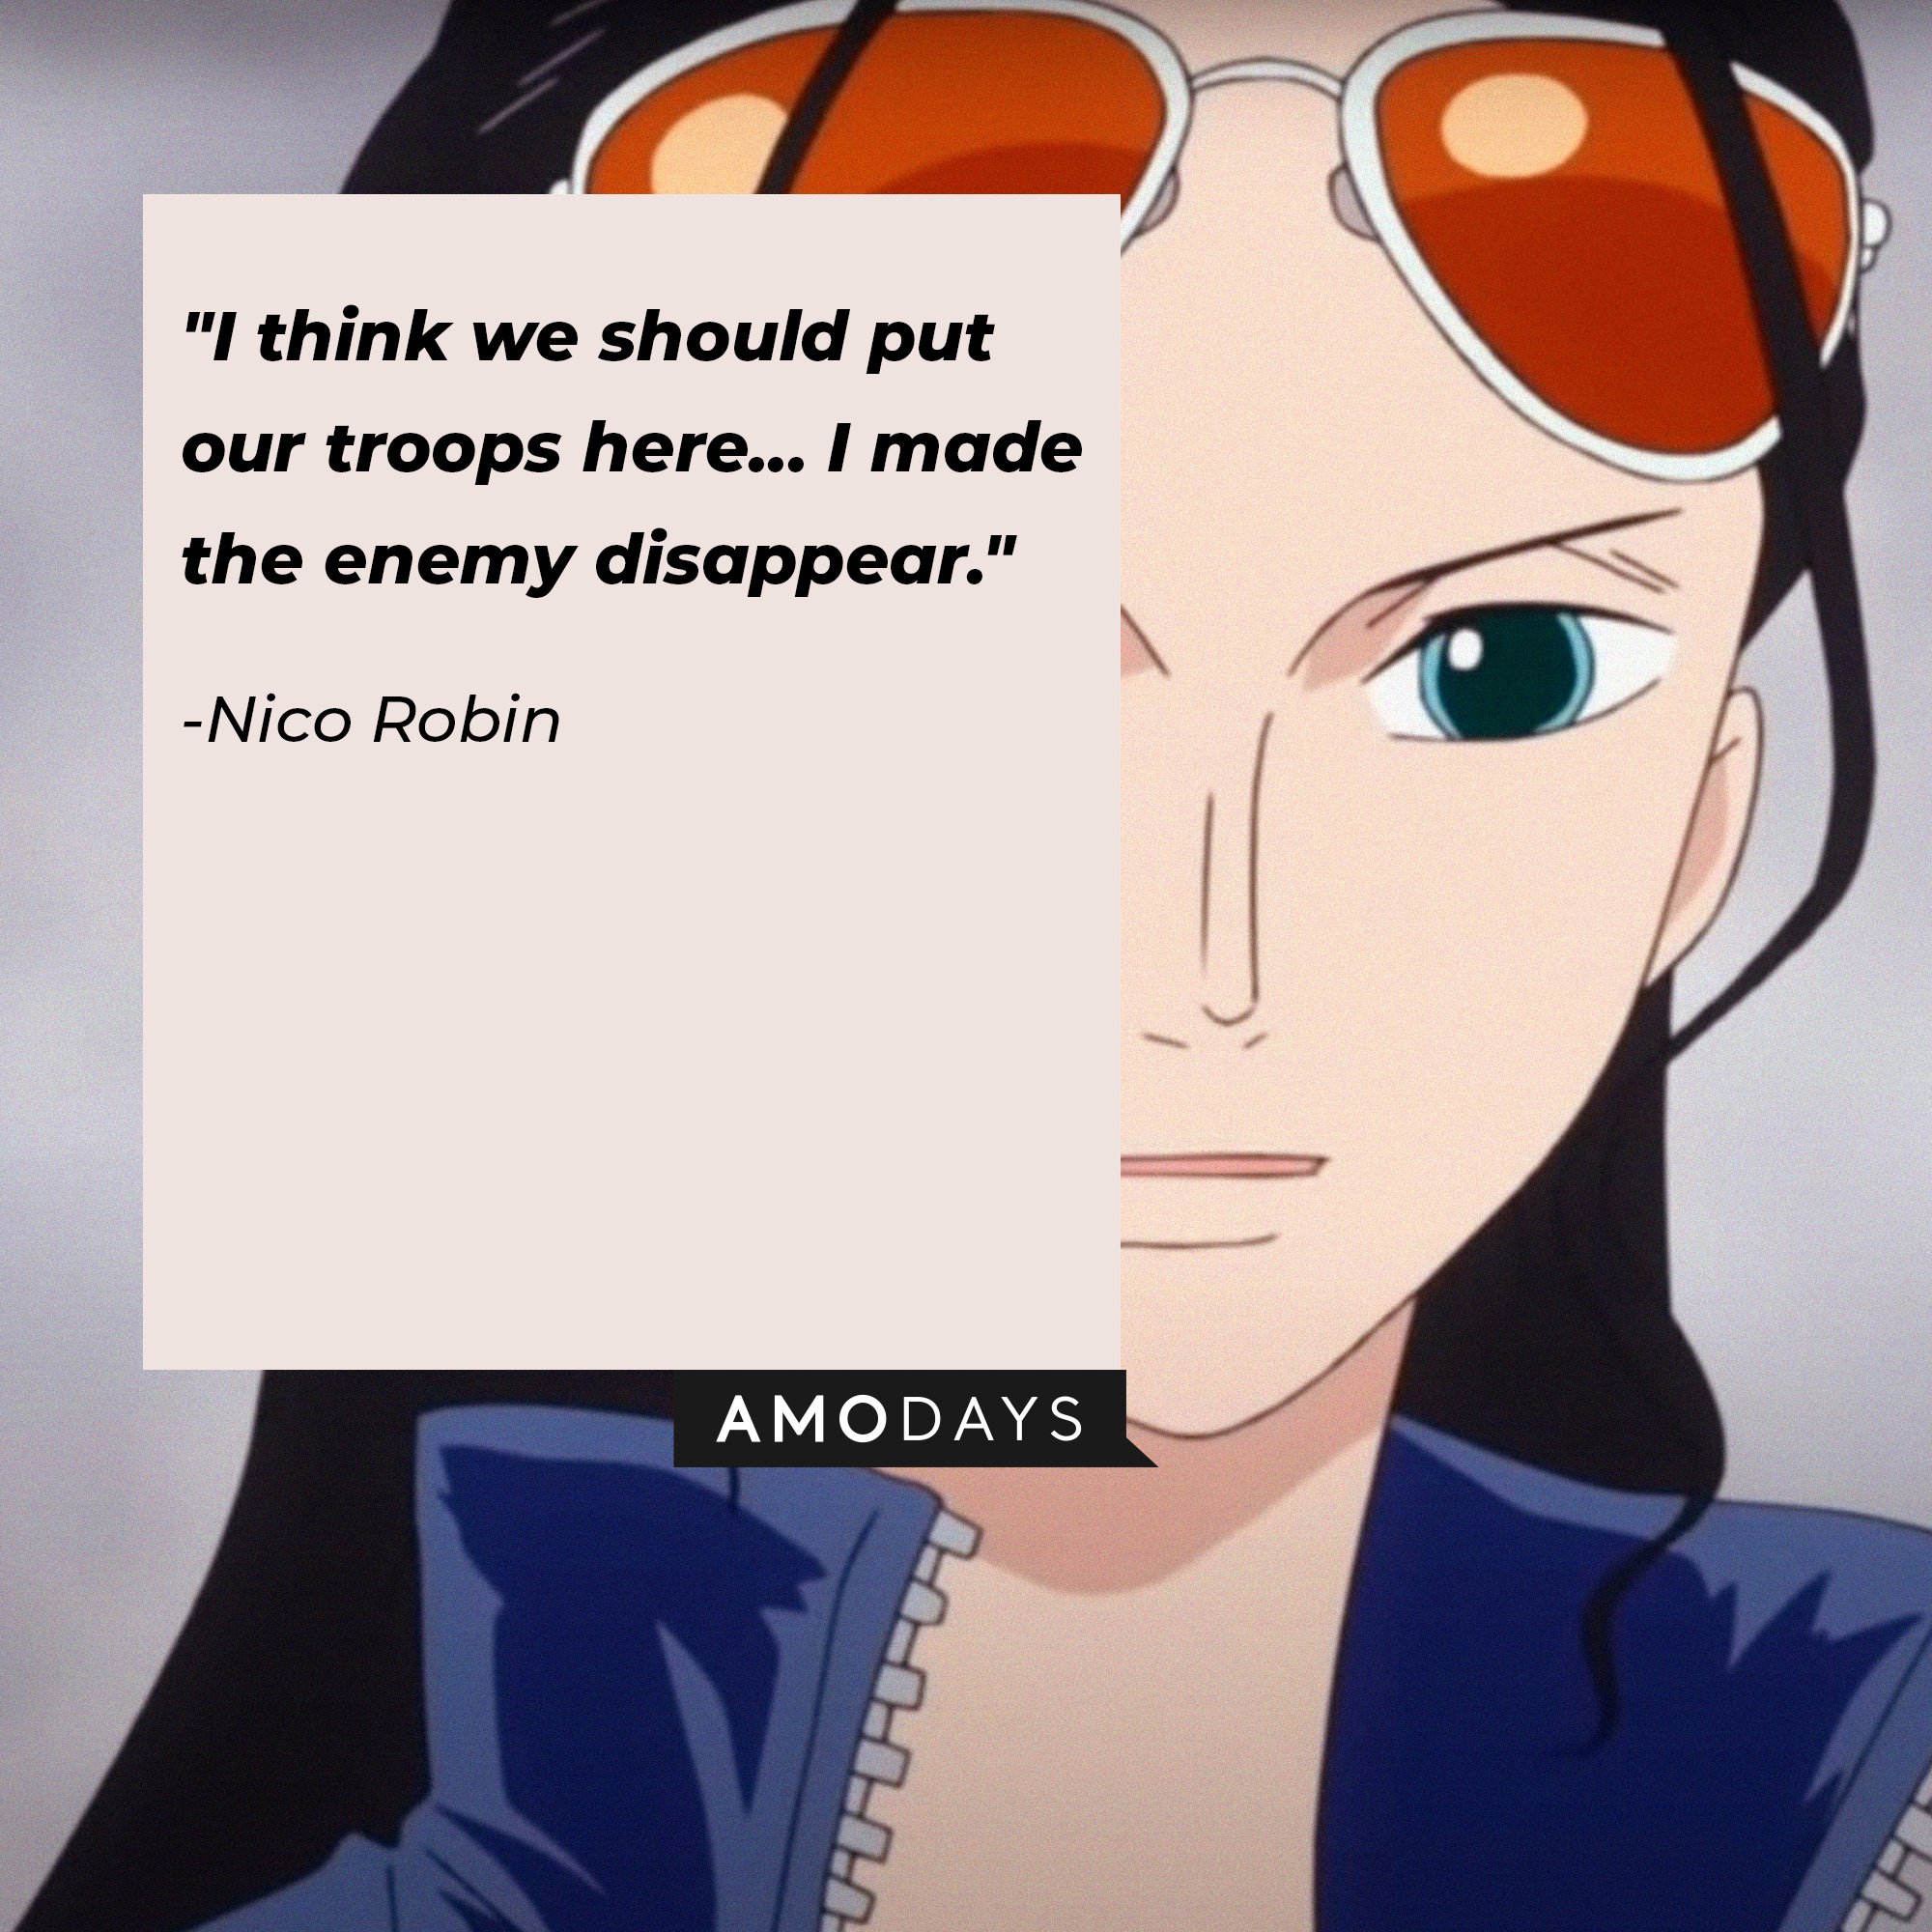 Nico Robin’s quote: "I think we should put our troops here... I made the enemy disappear." | Image: AmoDays